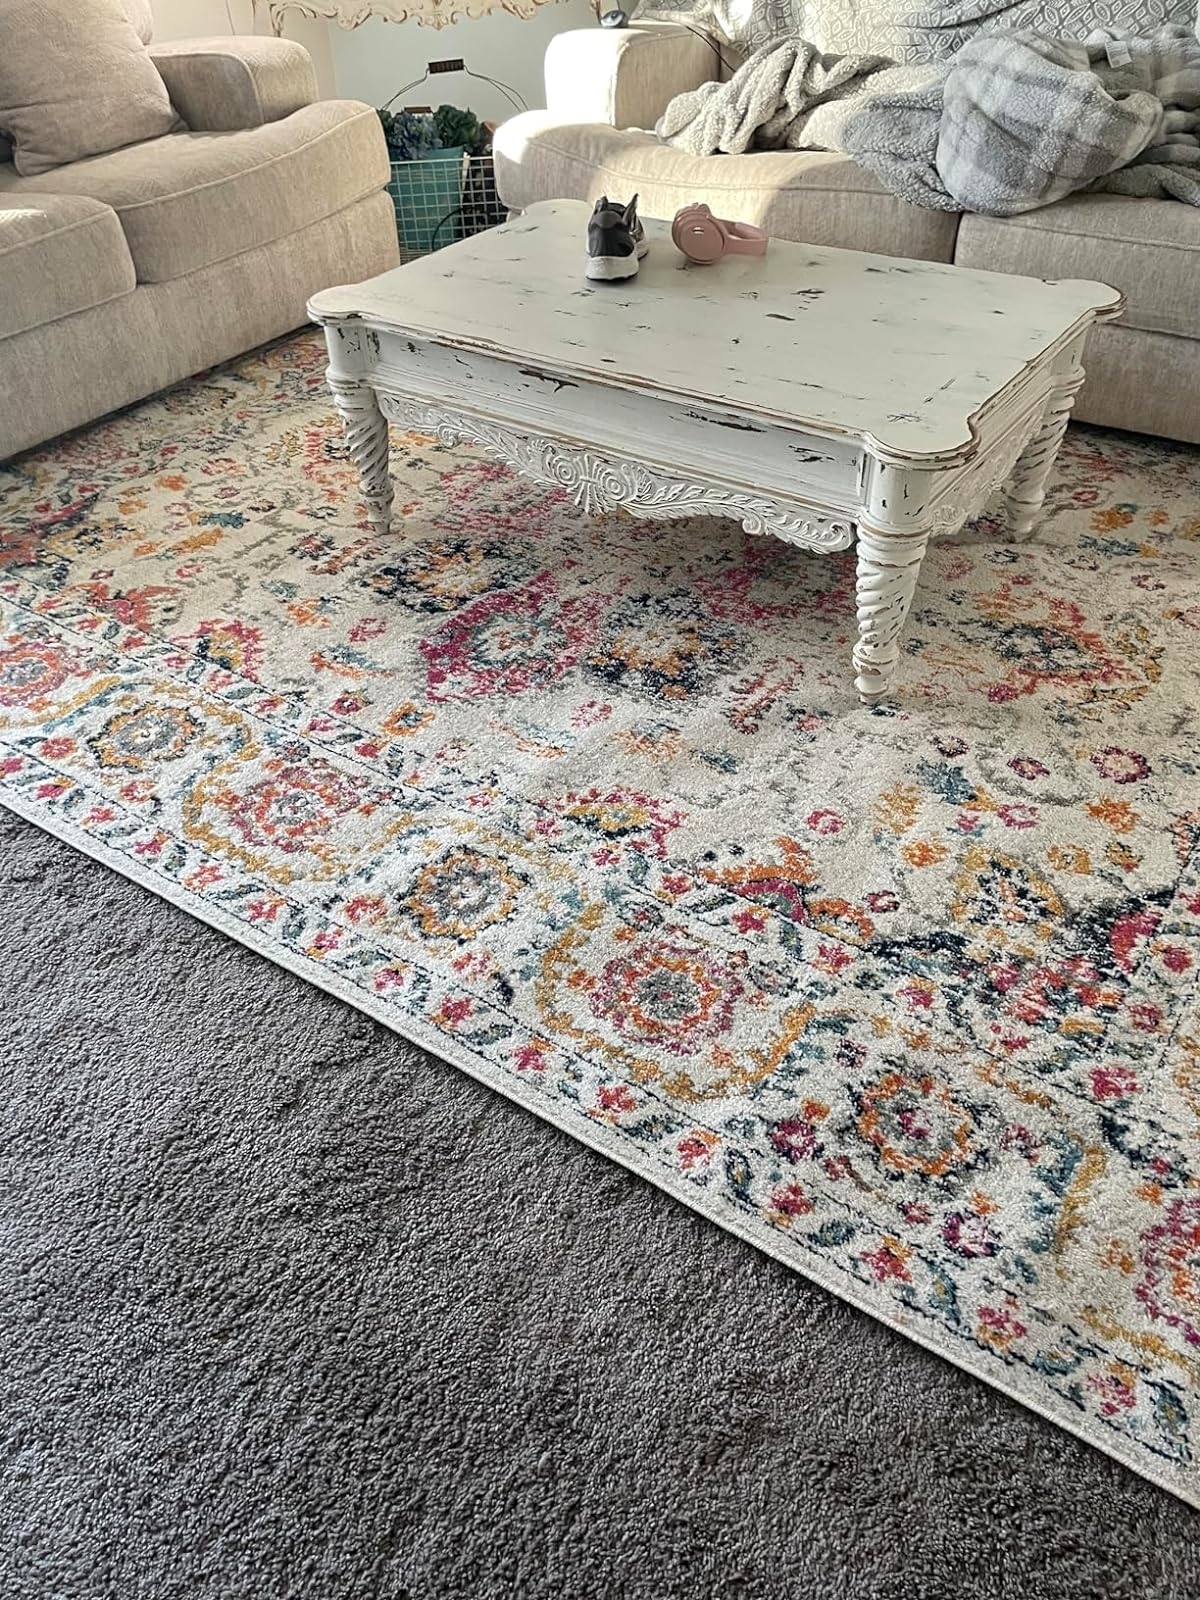 A distressed white coffee table on a floral rug in a living room, with a sofa and blanket visible